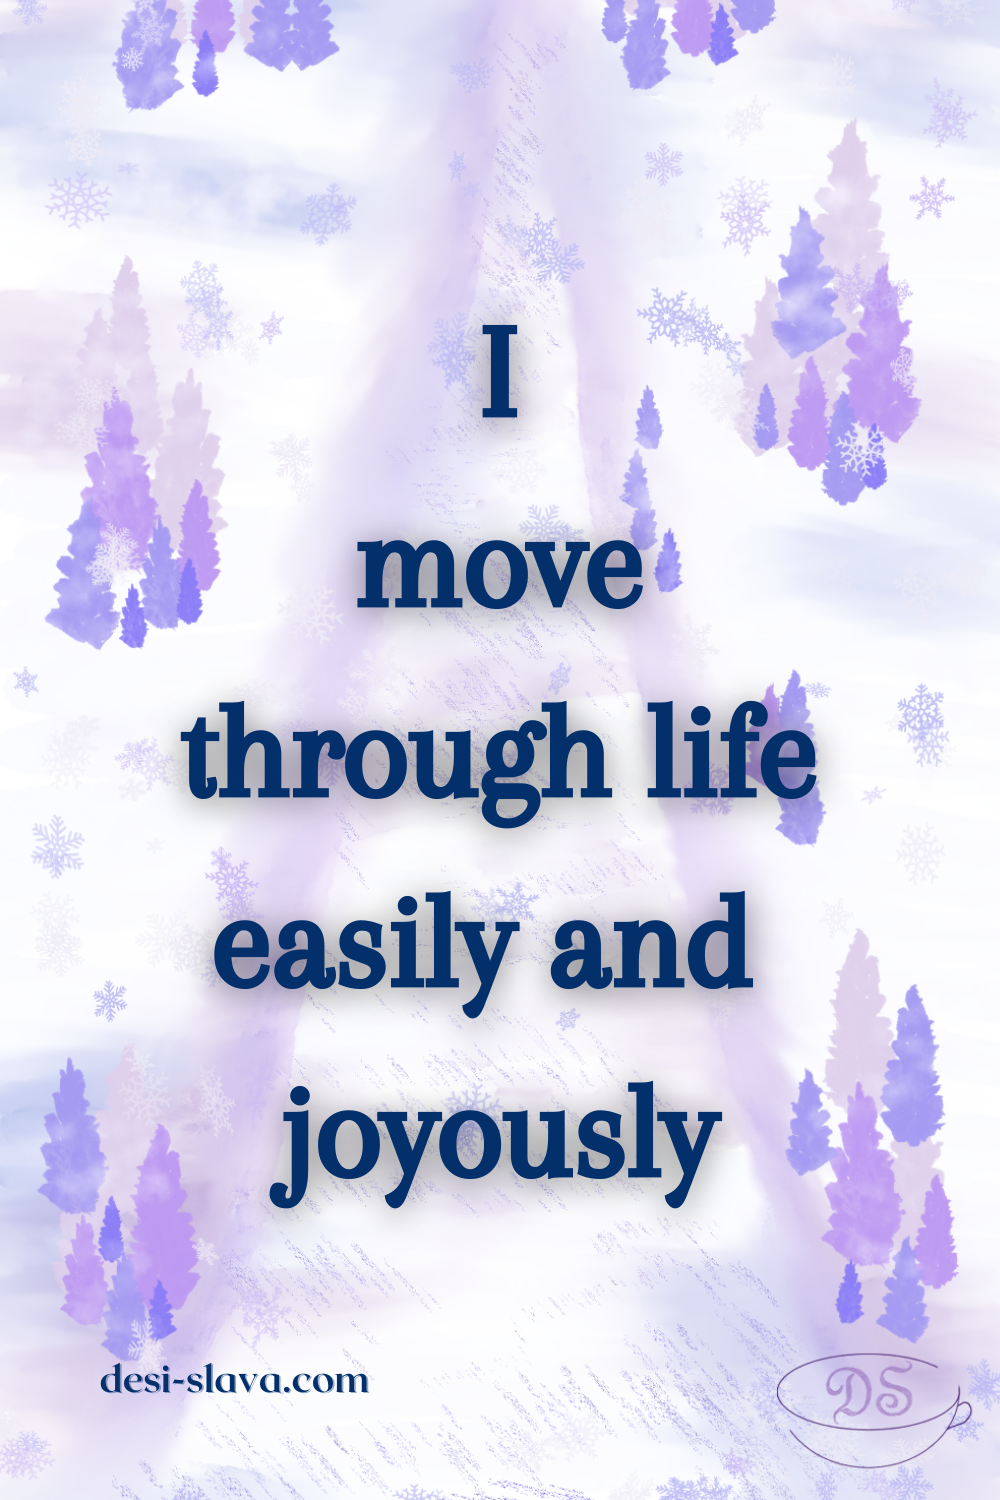 Positive Affirmation for Moving Forward Easily in Life